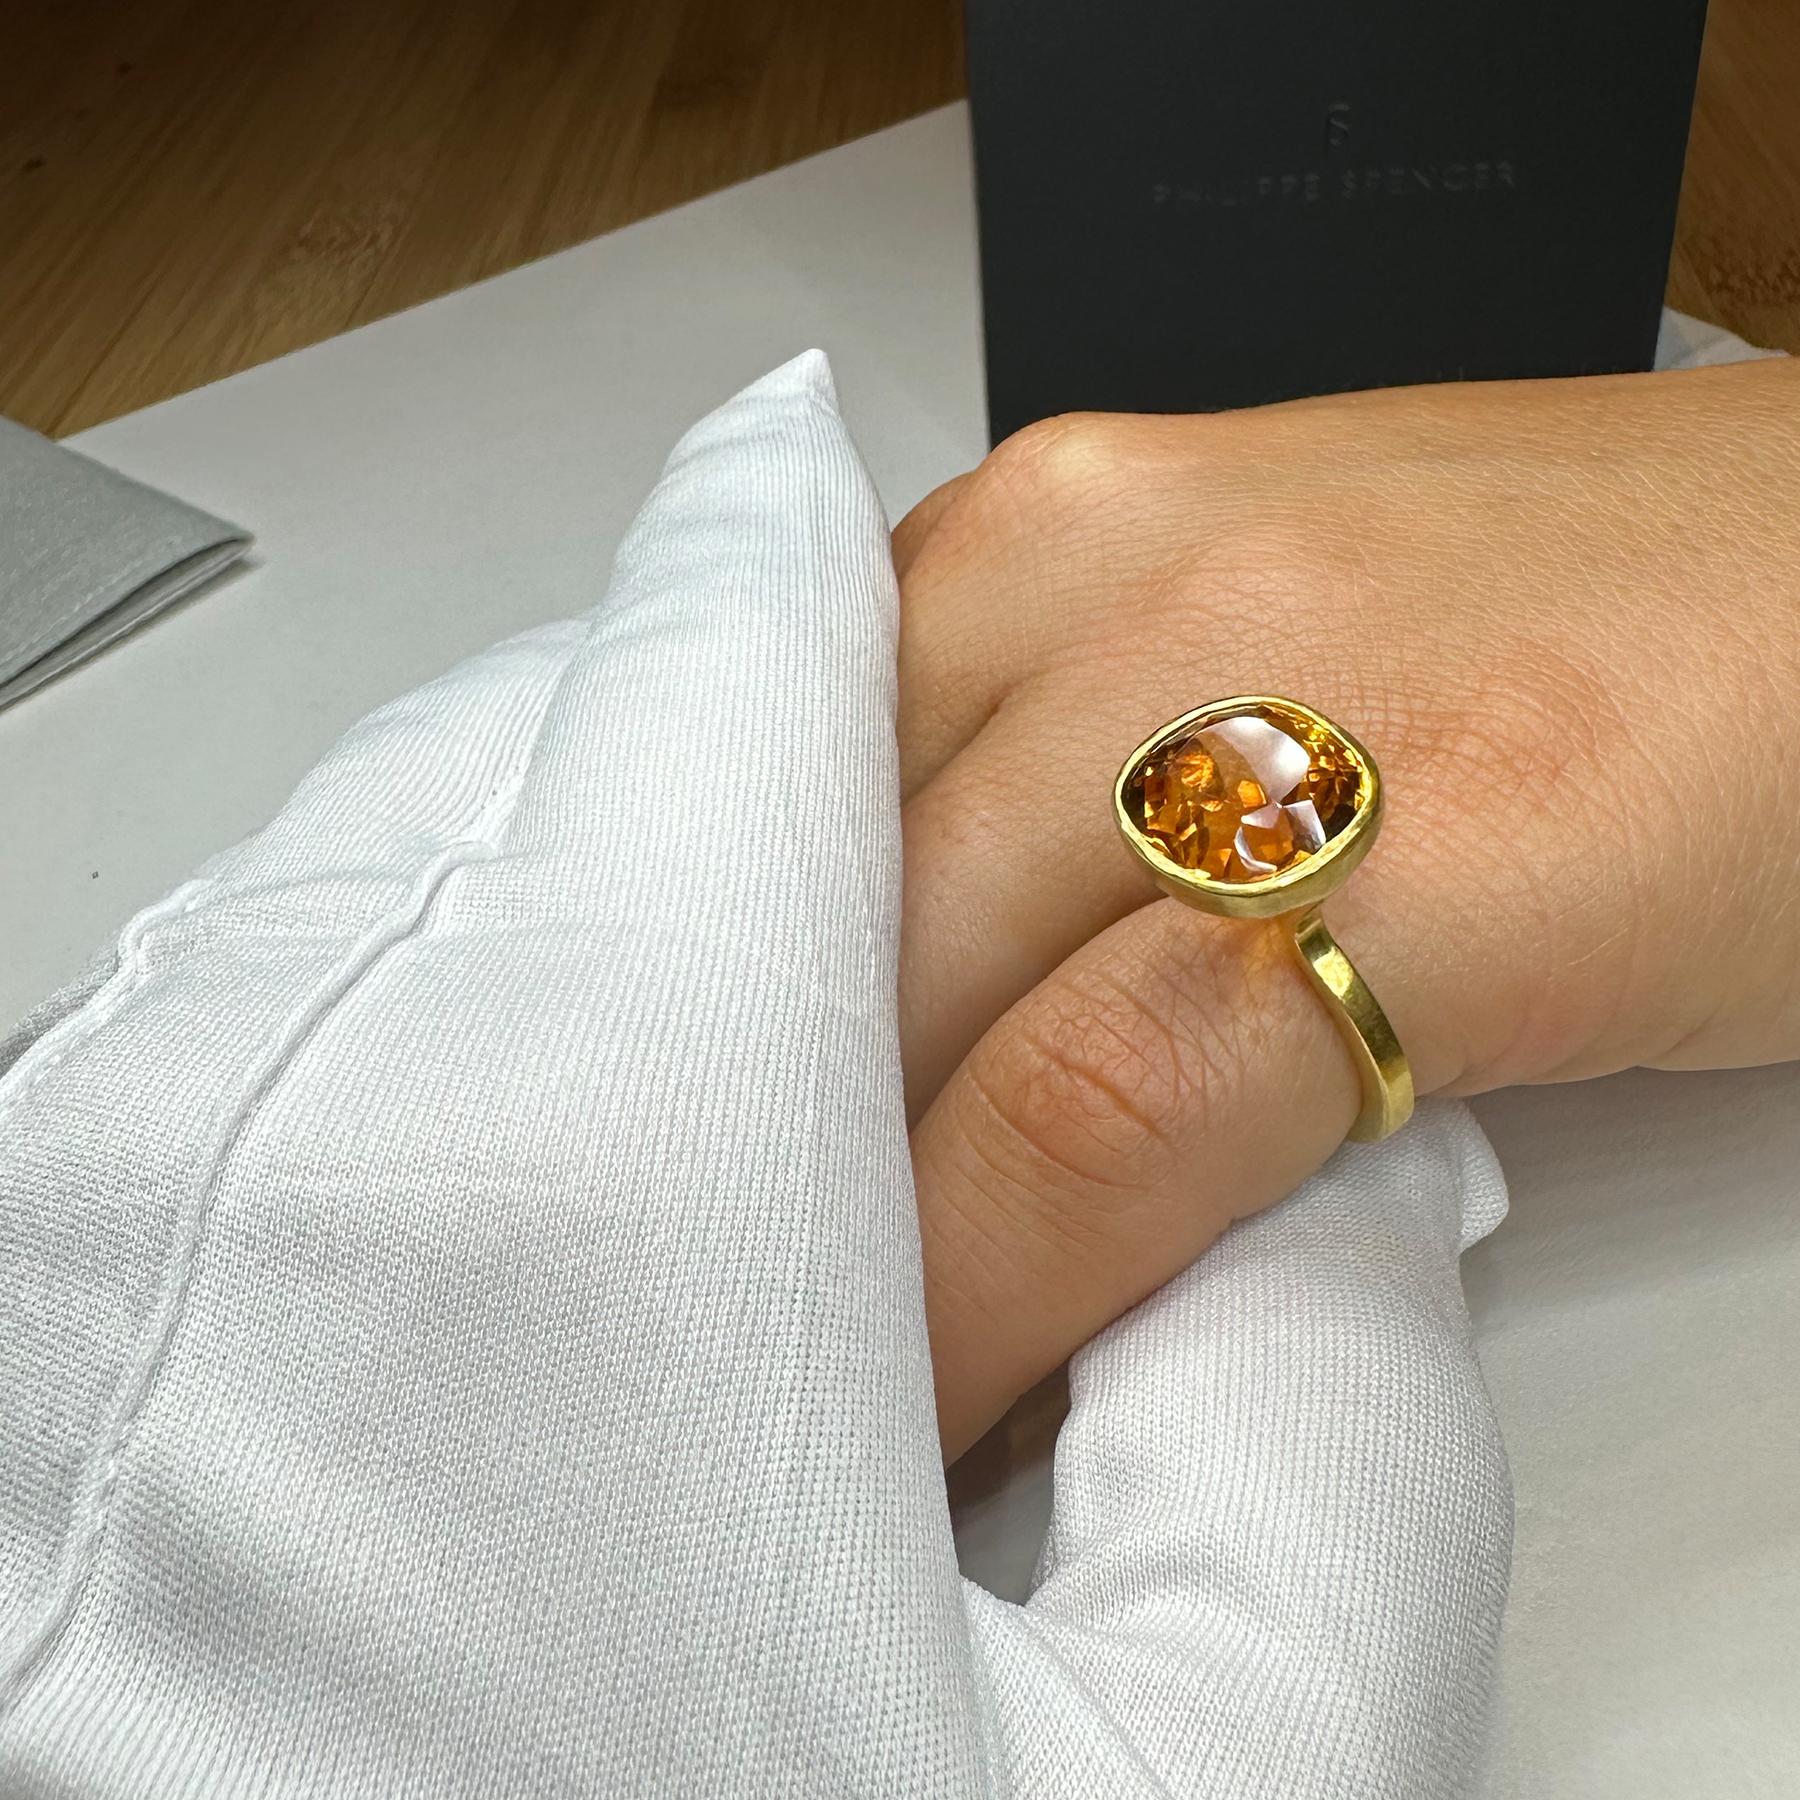 Square Cut PHILIPPE SPENCER 9.2 Ct. Gold Citrine in 22K and 20K Gold Statement Ring For Sale